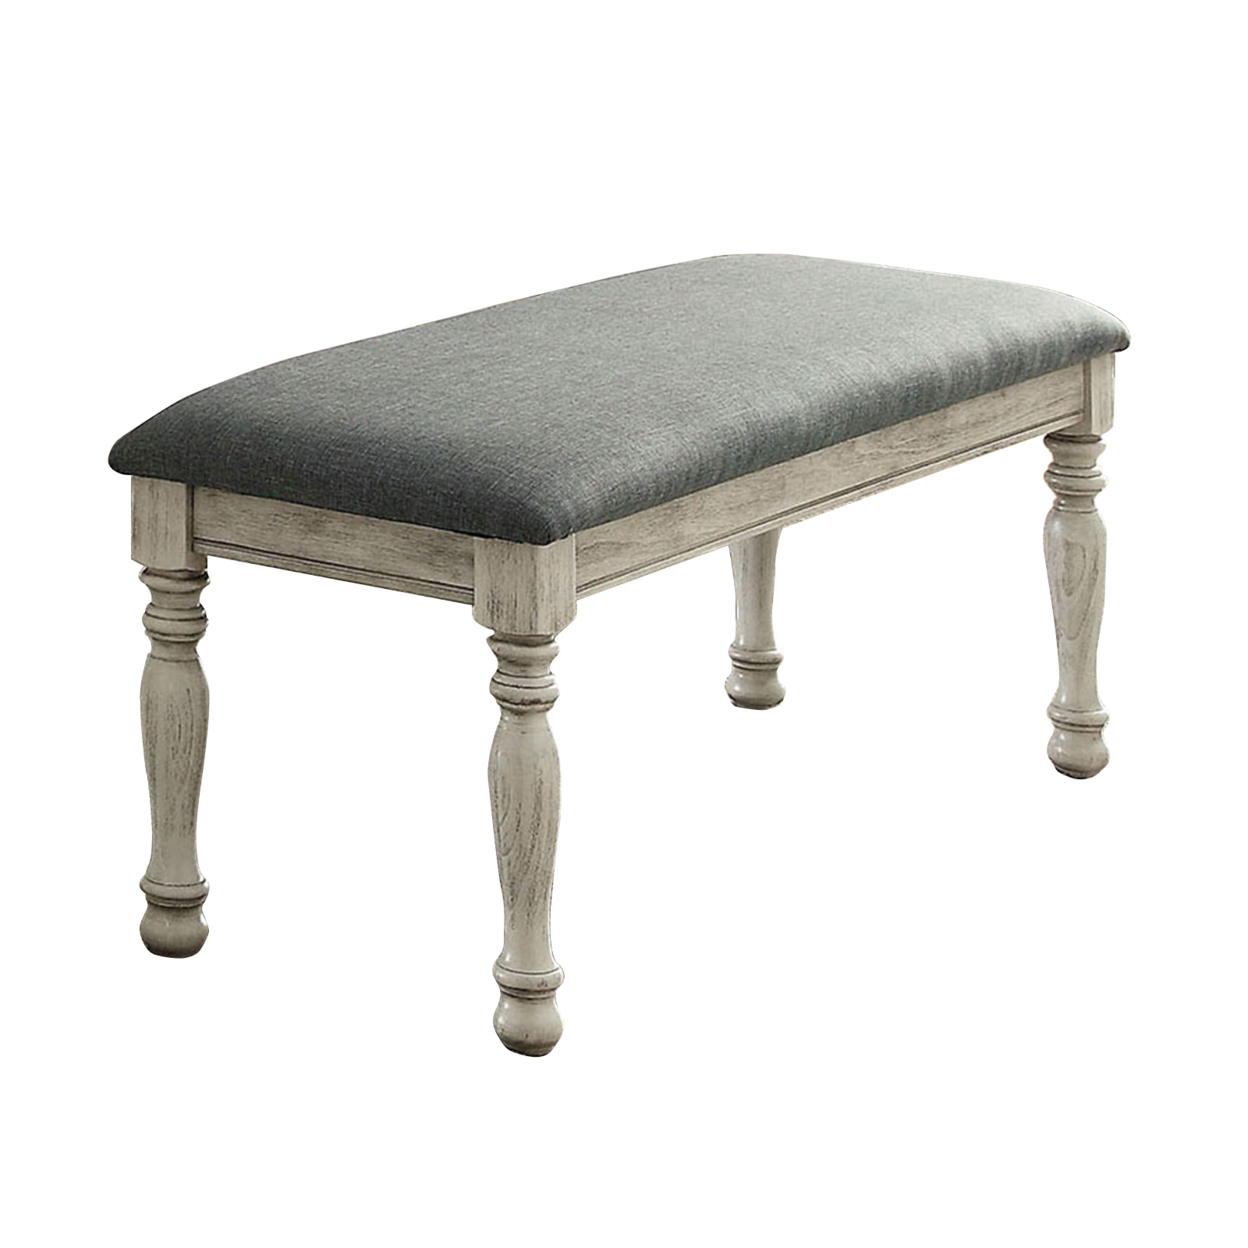 Transitional Fabric Upholstered Wooden Bench, Gray And White- Saltoro Sherpi